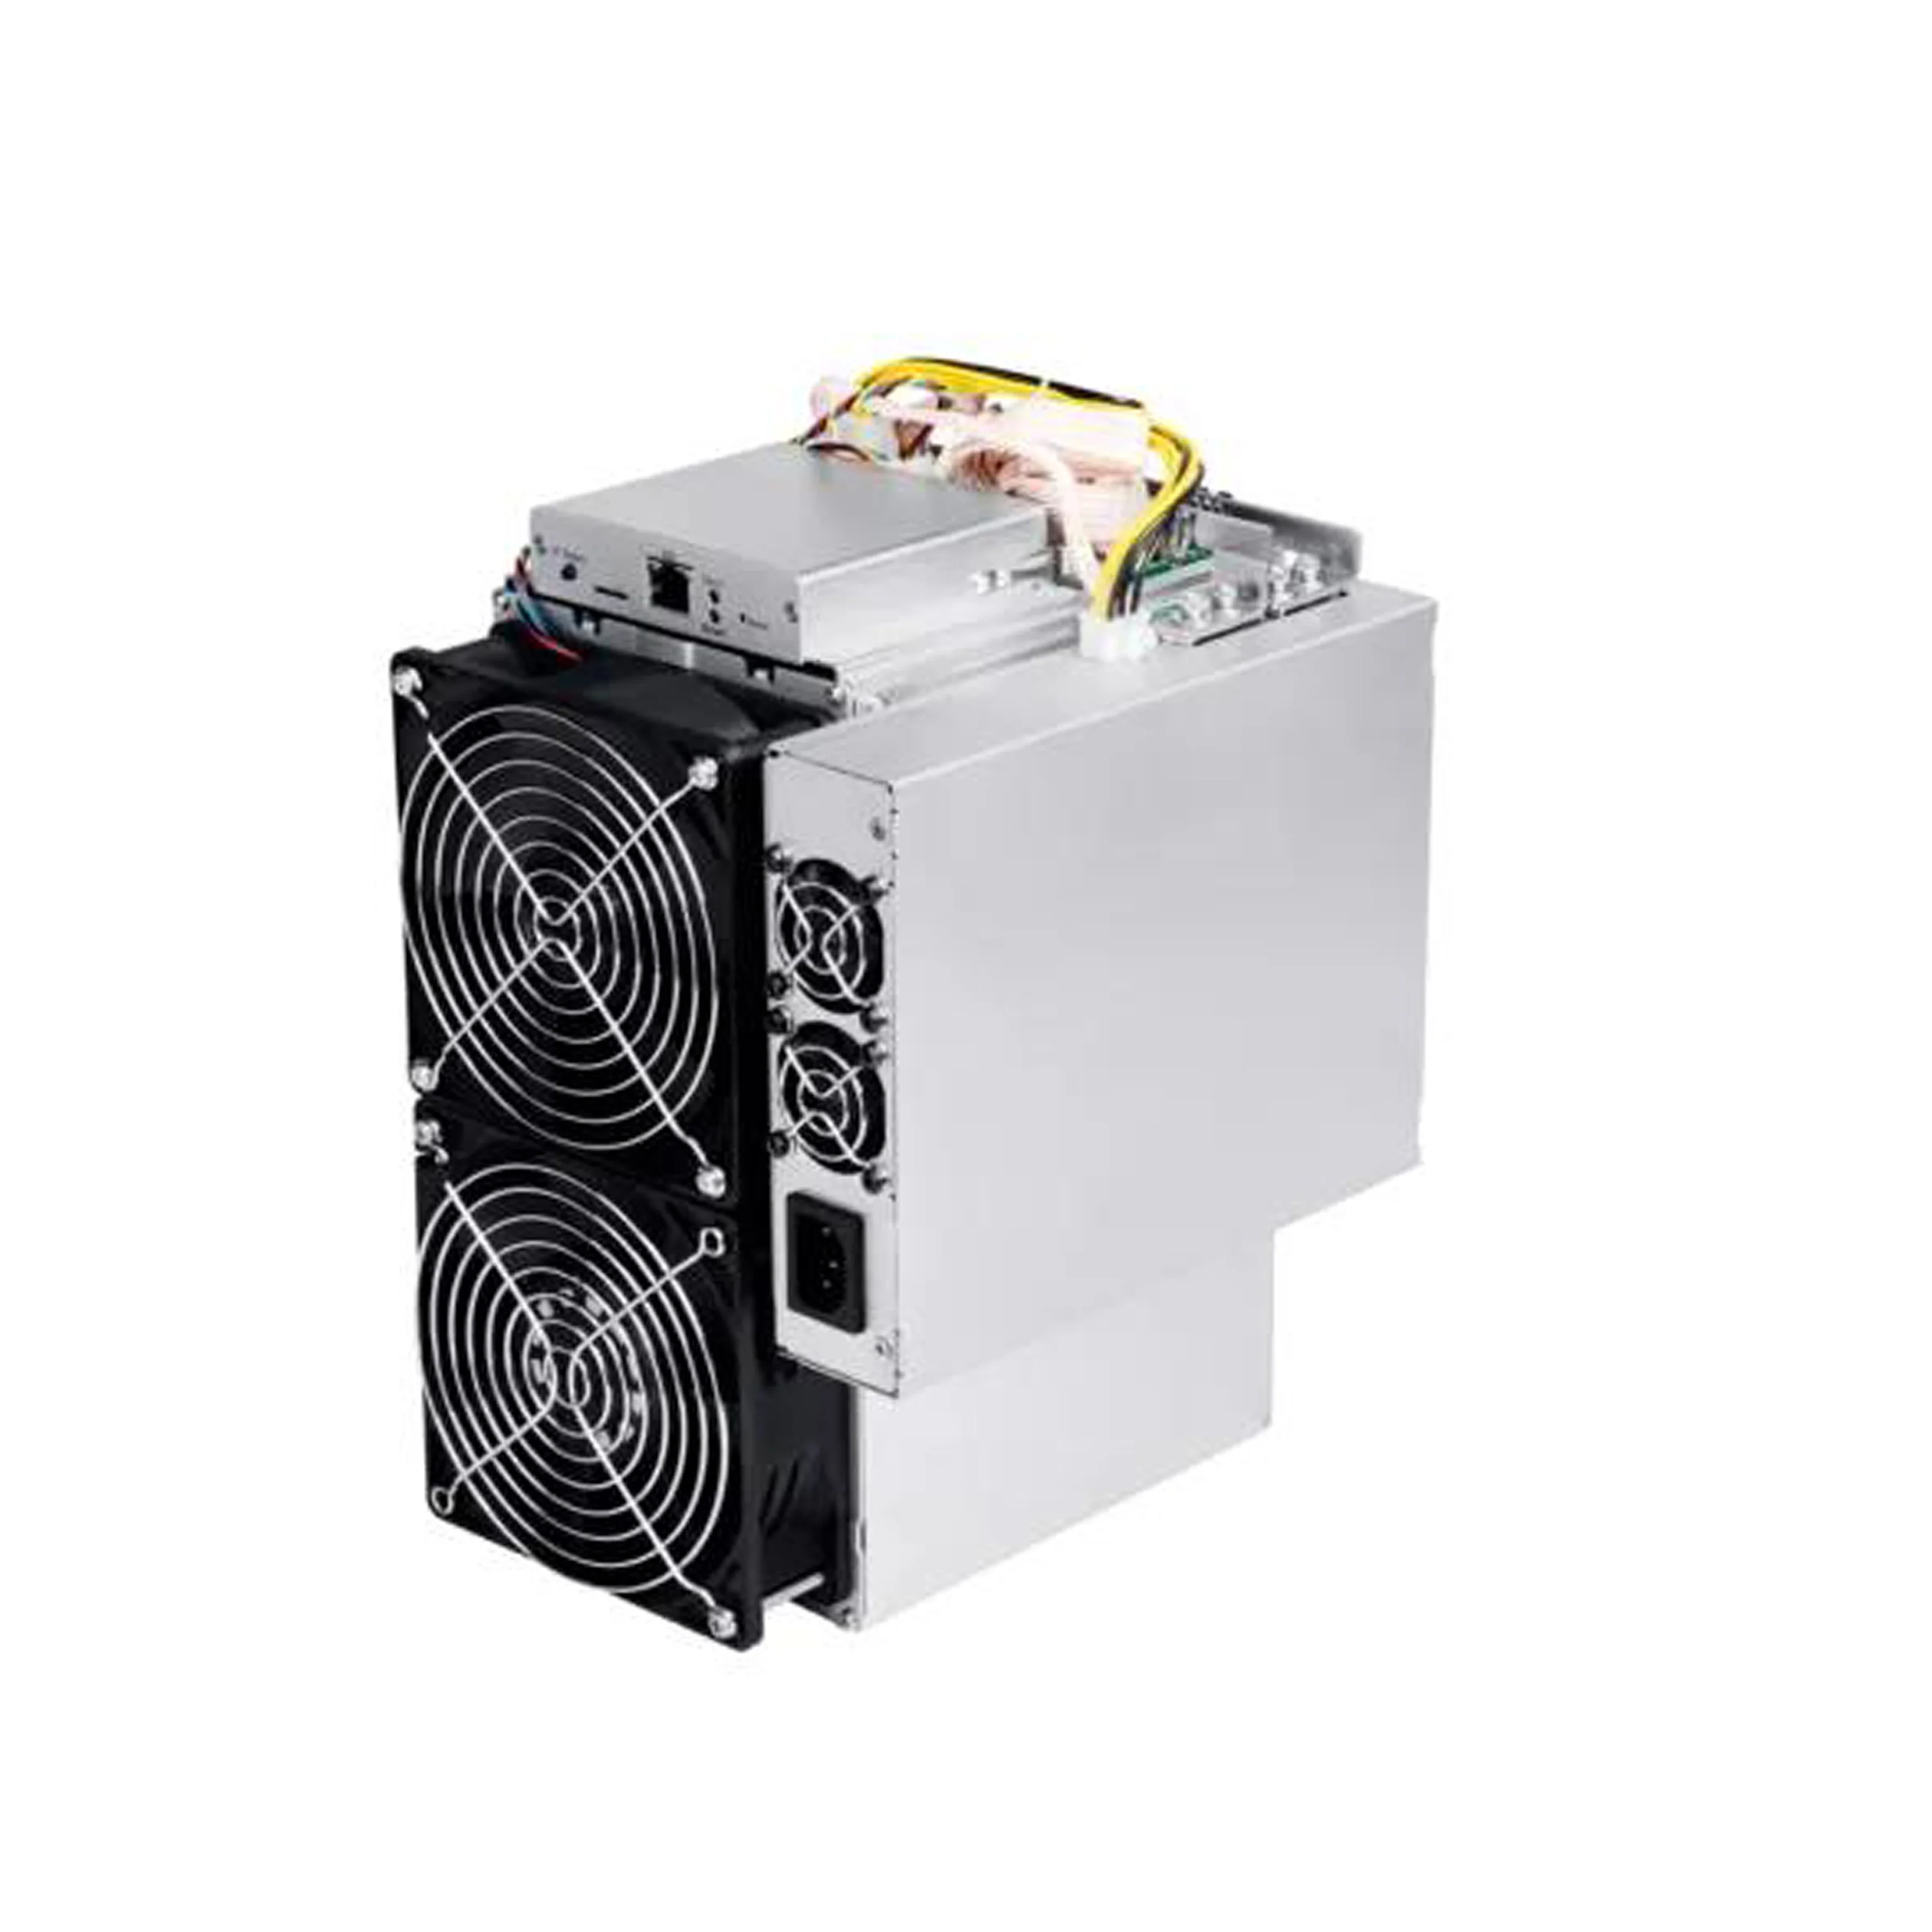 Tomax Bitmain Antminer T15 23th/s Coin Machine Asicminer Bitcoin Wallet -  Buy New Asic Chip Mining Machine,Bitmain Antminer T15,Bitcoin Miner Product  on Alibaba.com